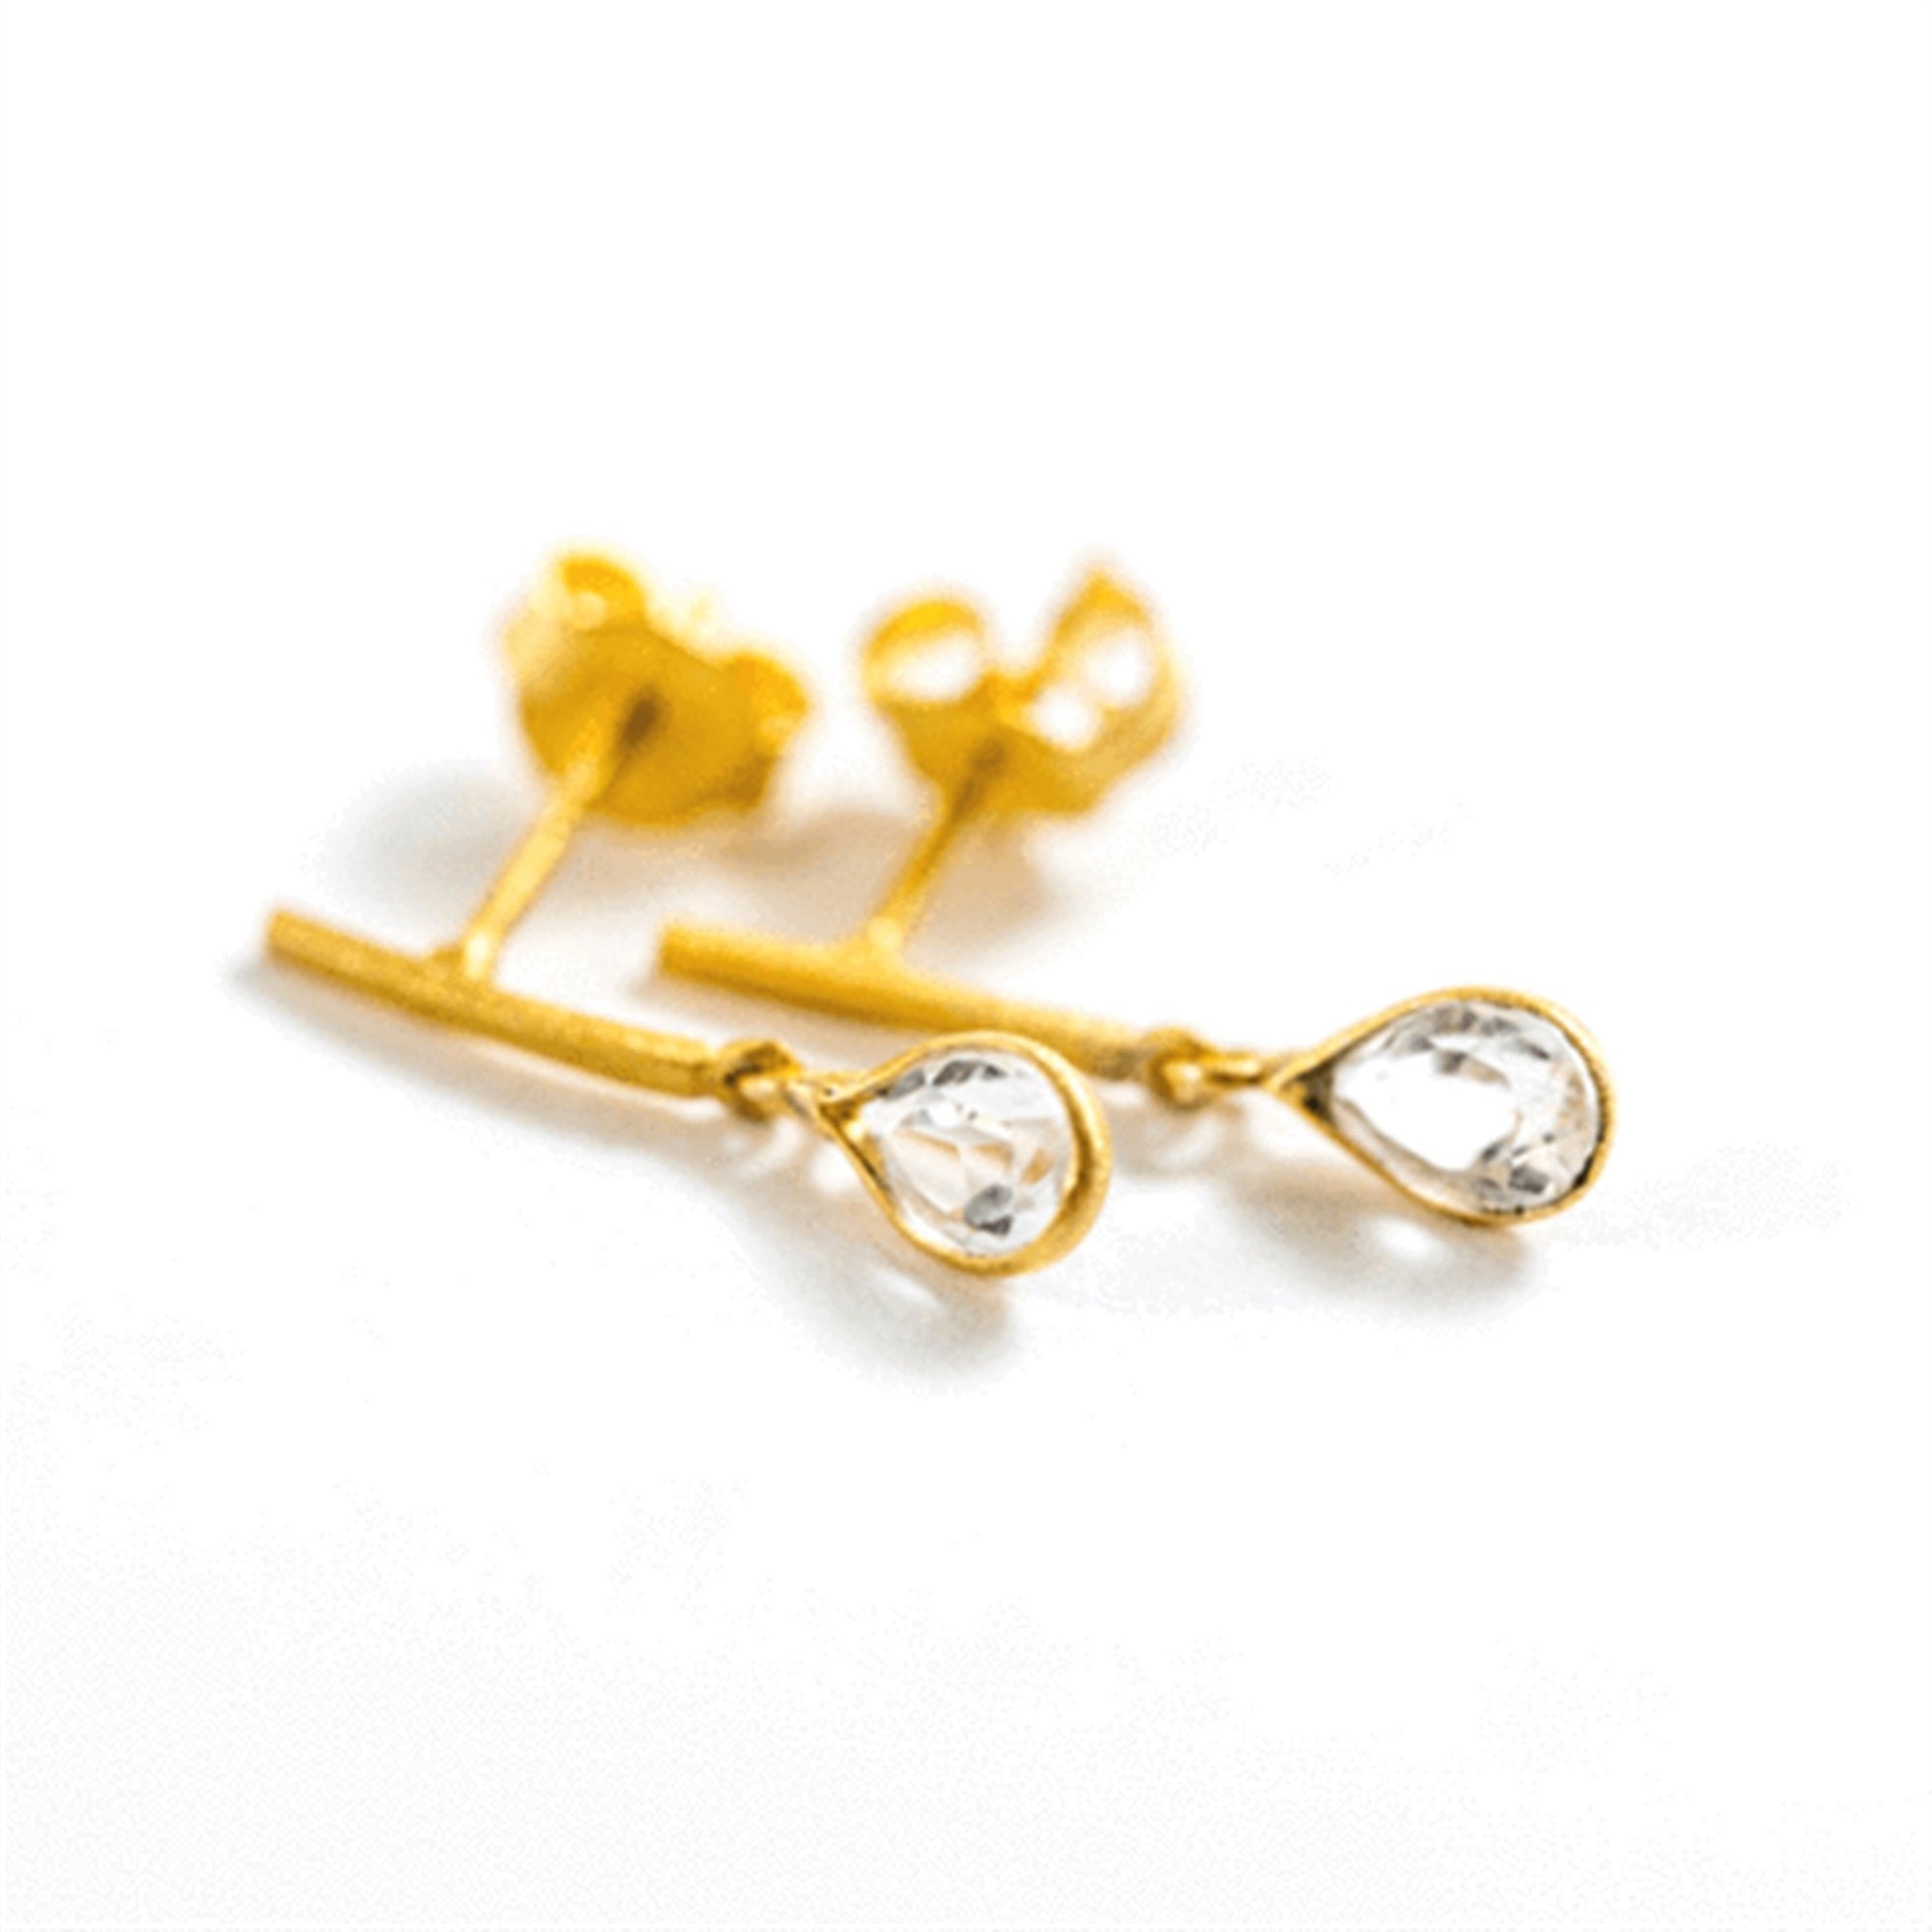 GOLD PLATED CRYSTAL DROP EARRINGS-Jewelry-Jack and Jill Boutique